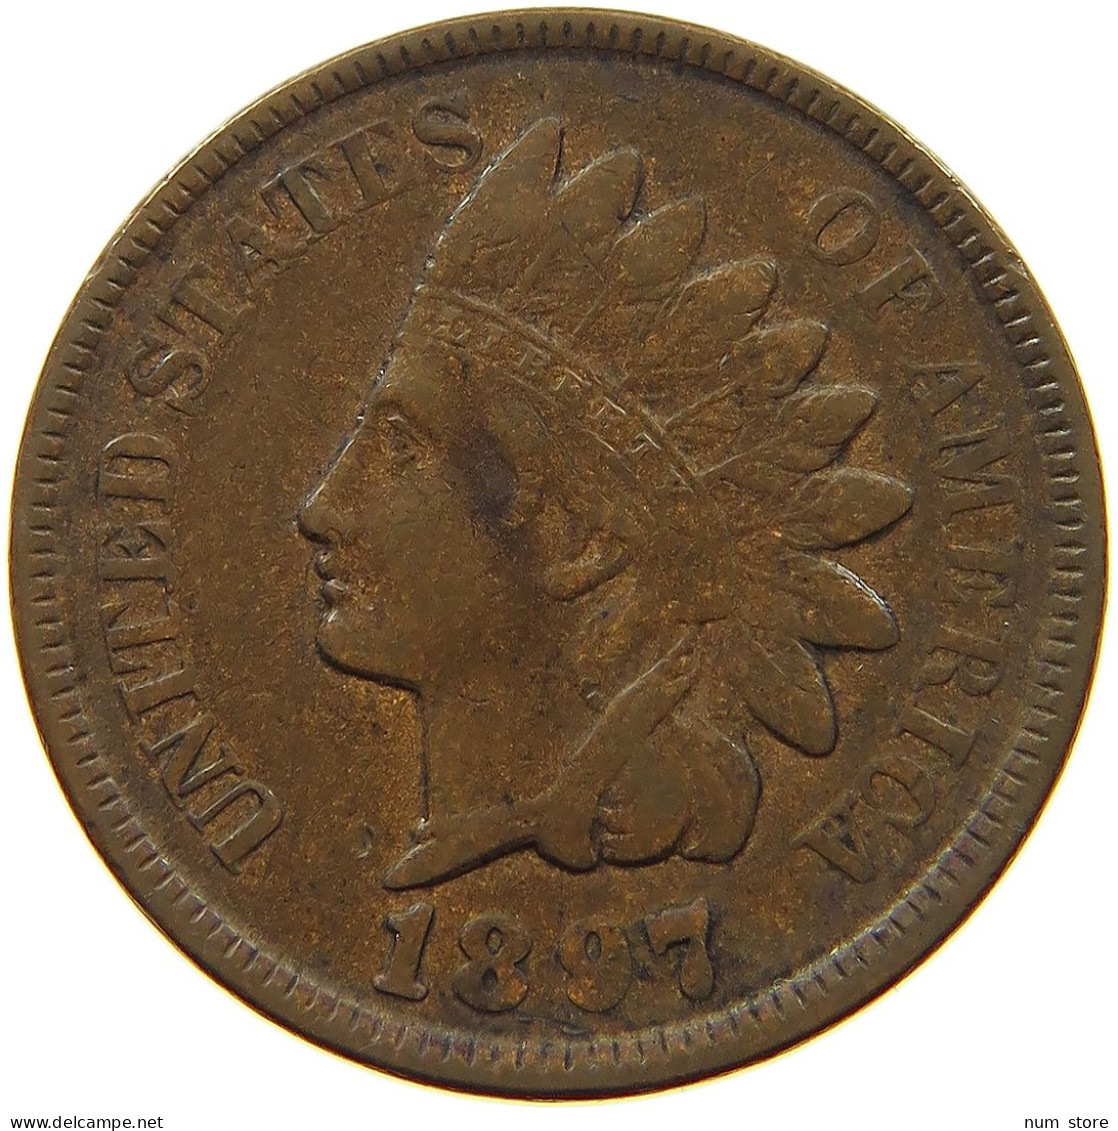 UNITED STATES OF AMERICA CENT 1897 INDIAN HEAD #s063 0069 - 1859-1909: Indian Head